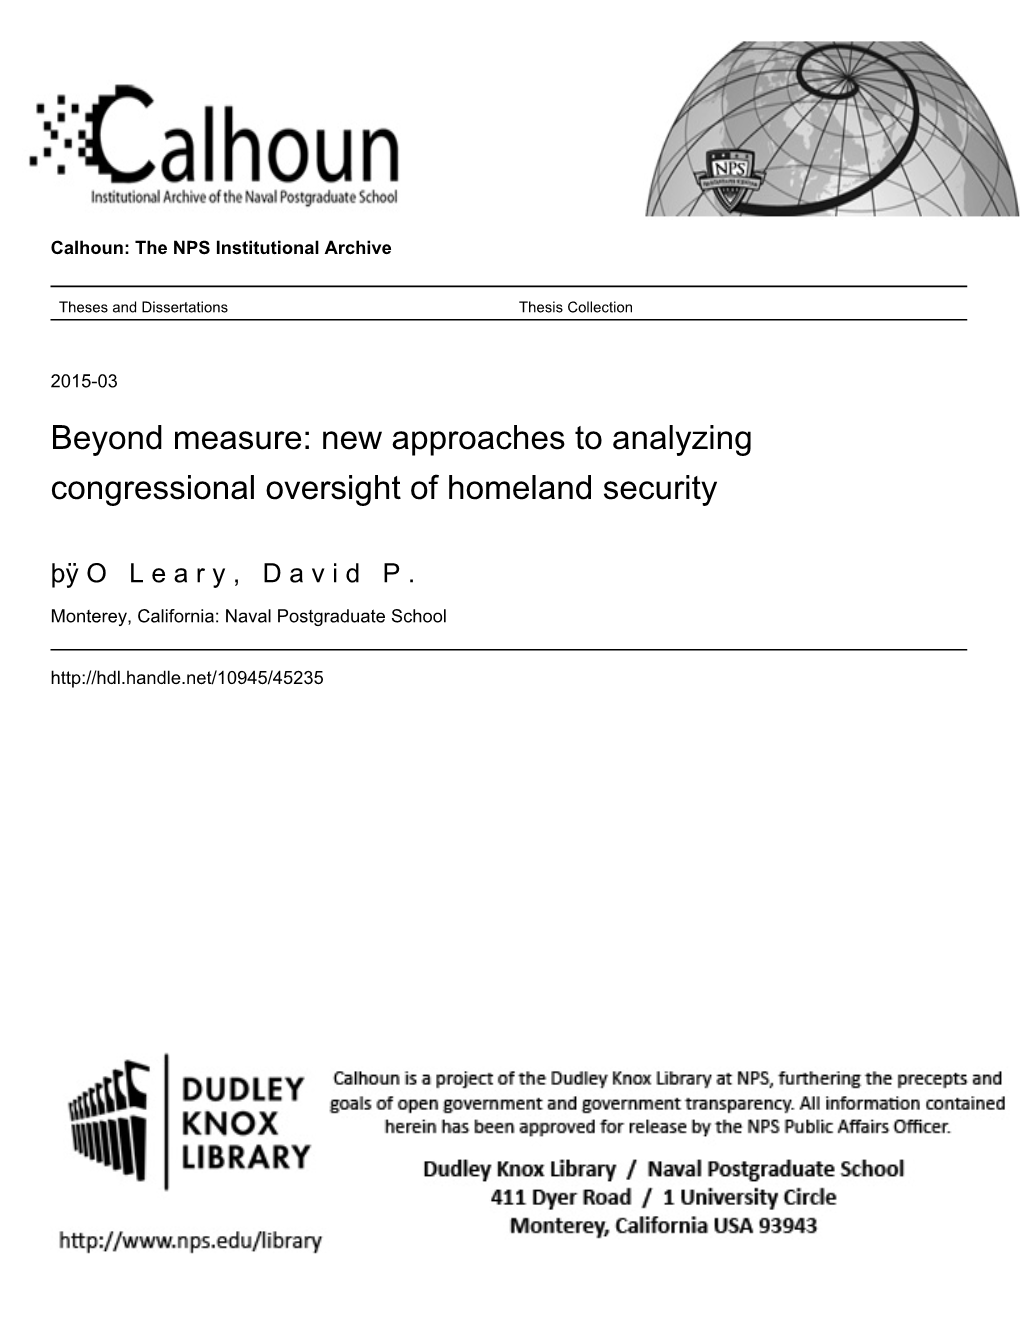 New Approaches to Analyzing Congressional Oversight of Homeland Security